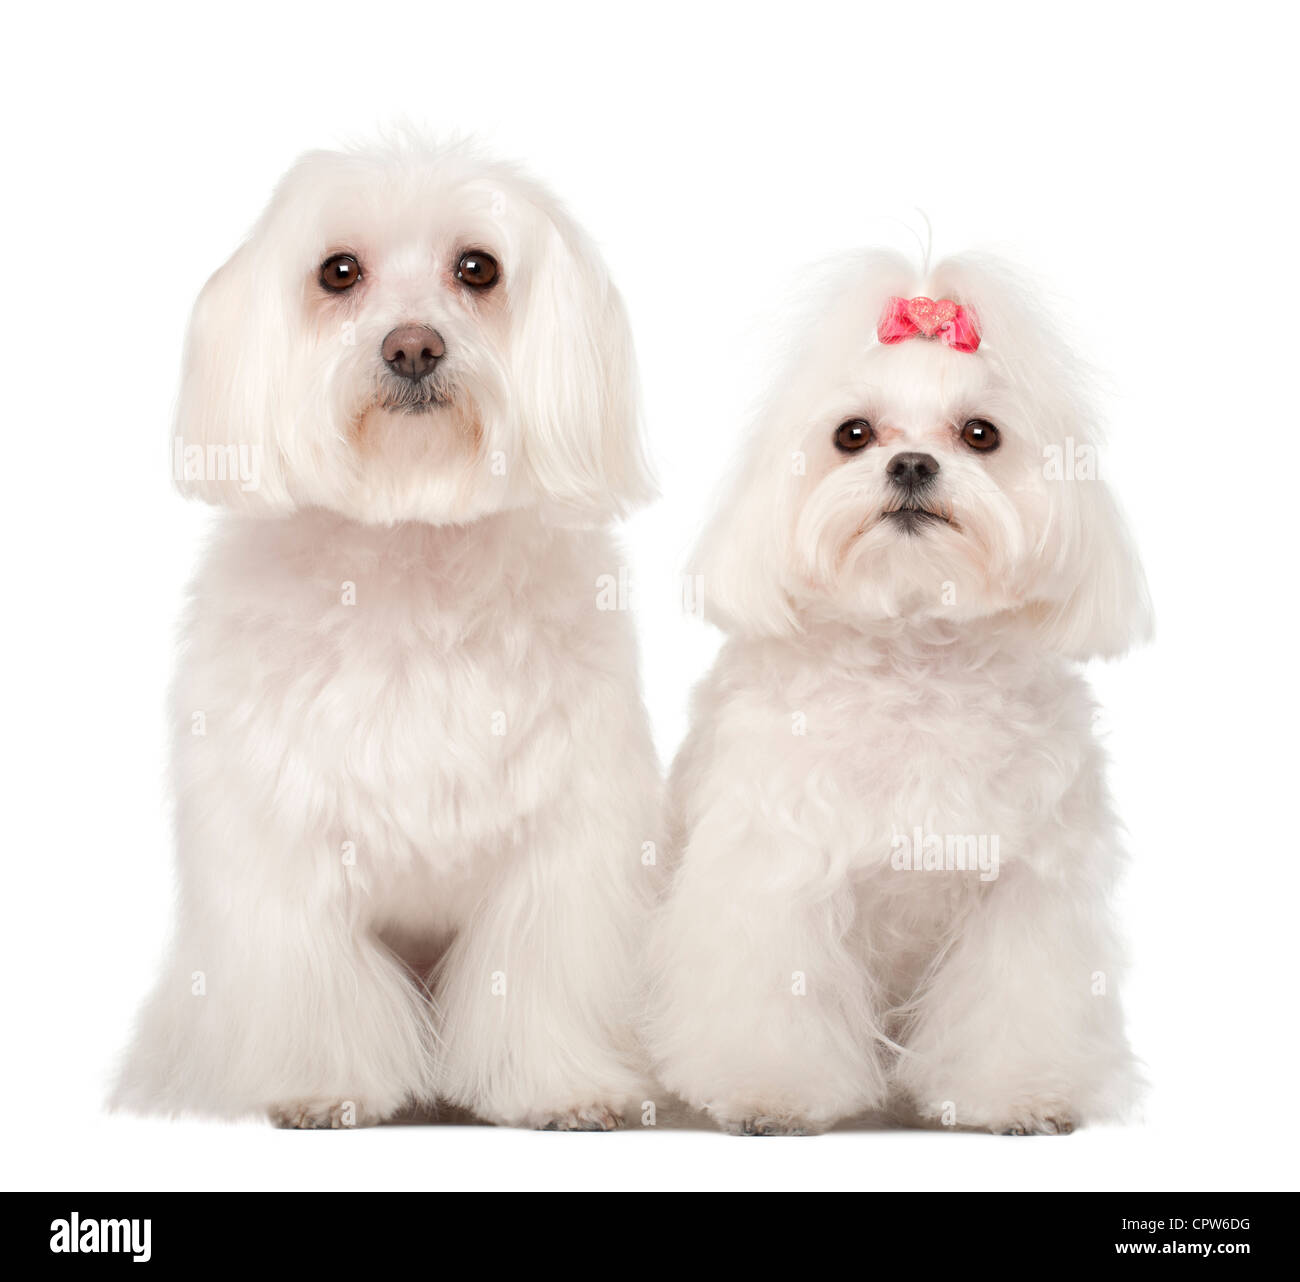 Maltese, 4 and 8 years old, sitting against white background Stock Photo